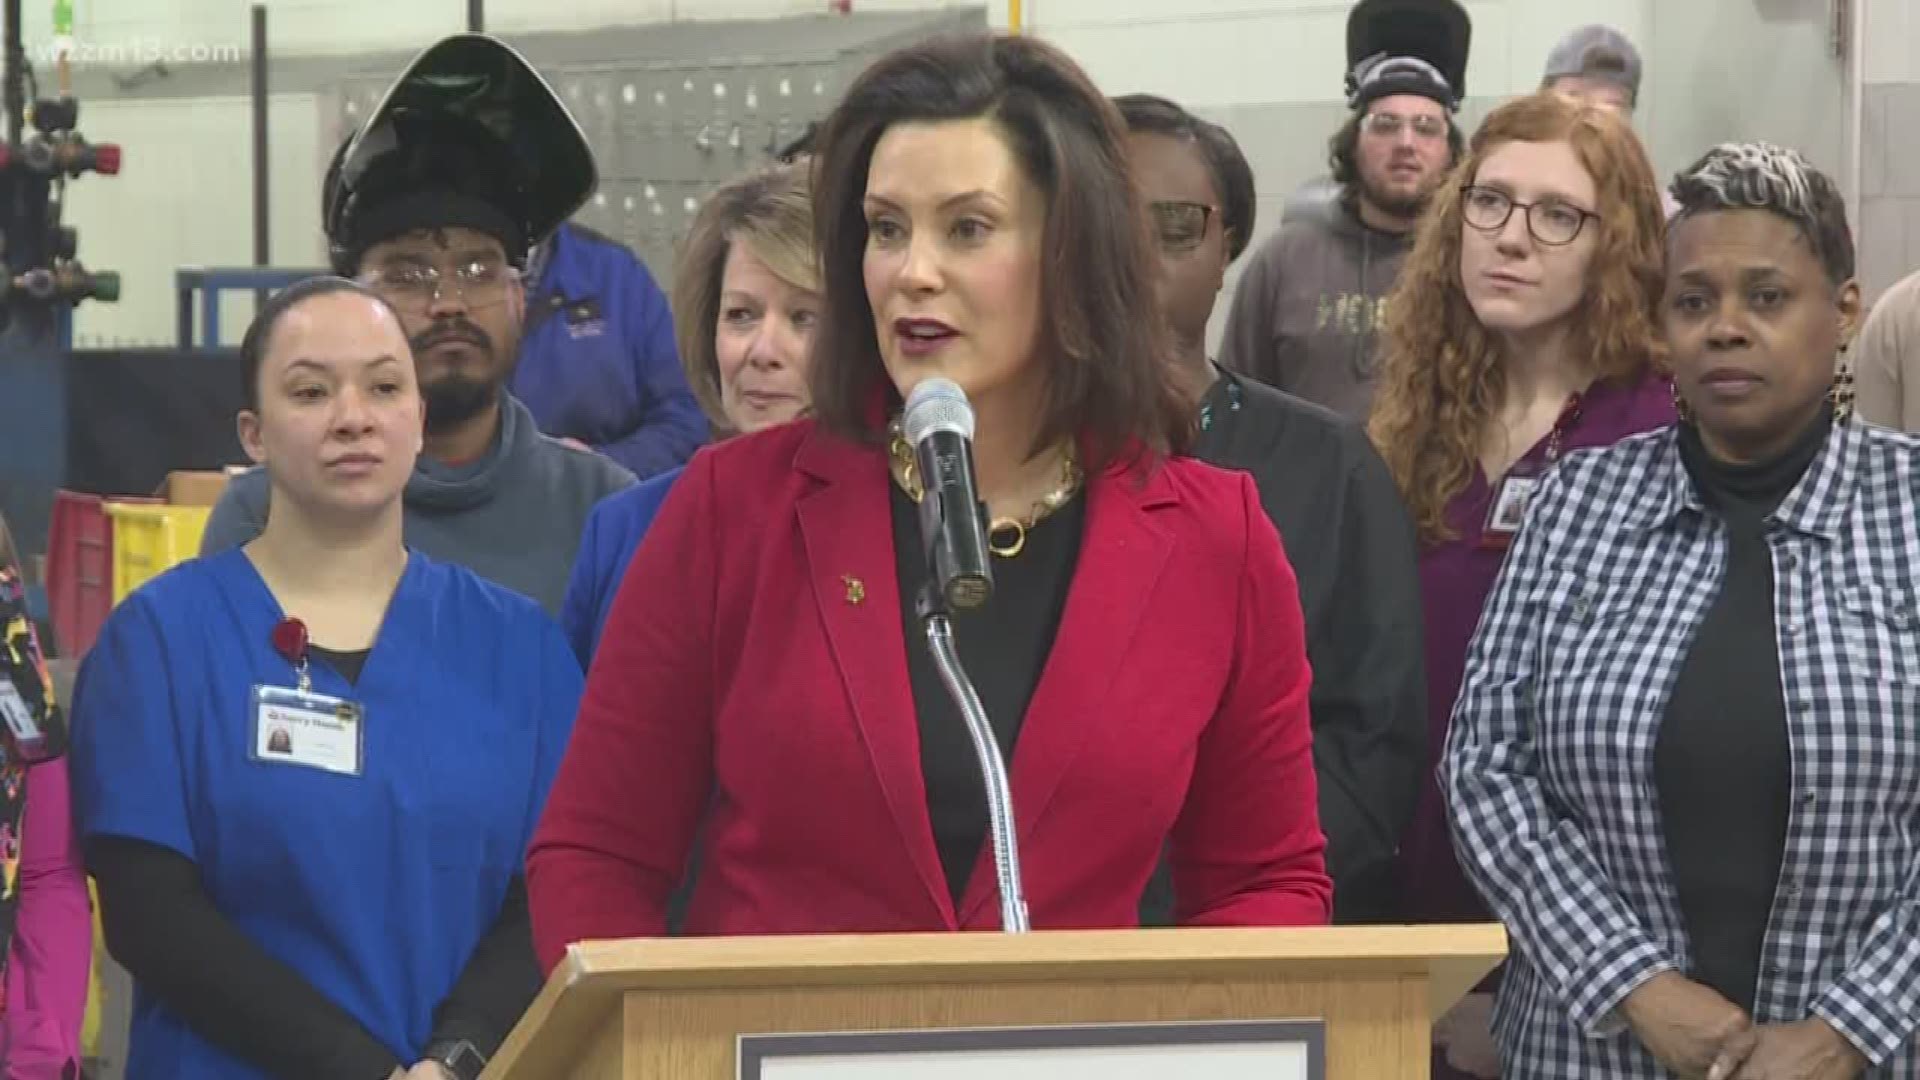 Gov. Gretchen Whitmer is in Grand Rapids talking education and jobs as part of her 50-event tour across Michigan.